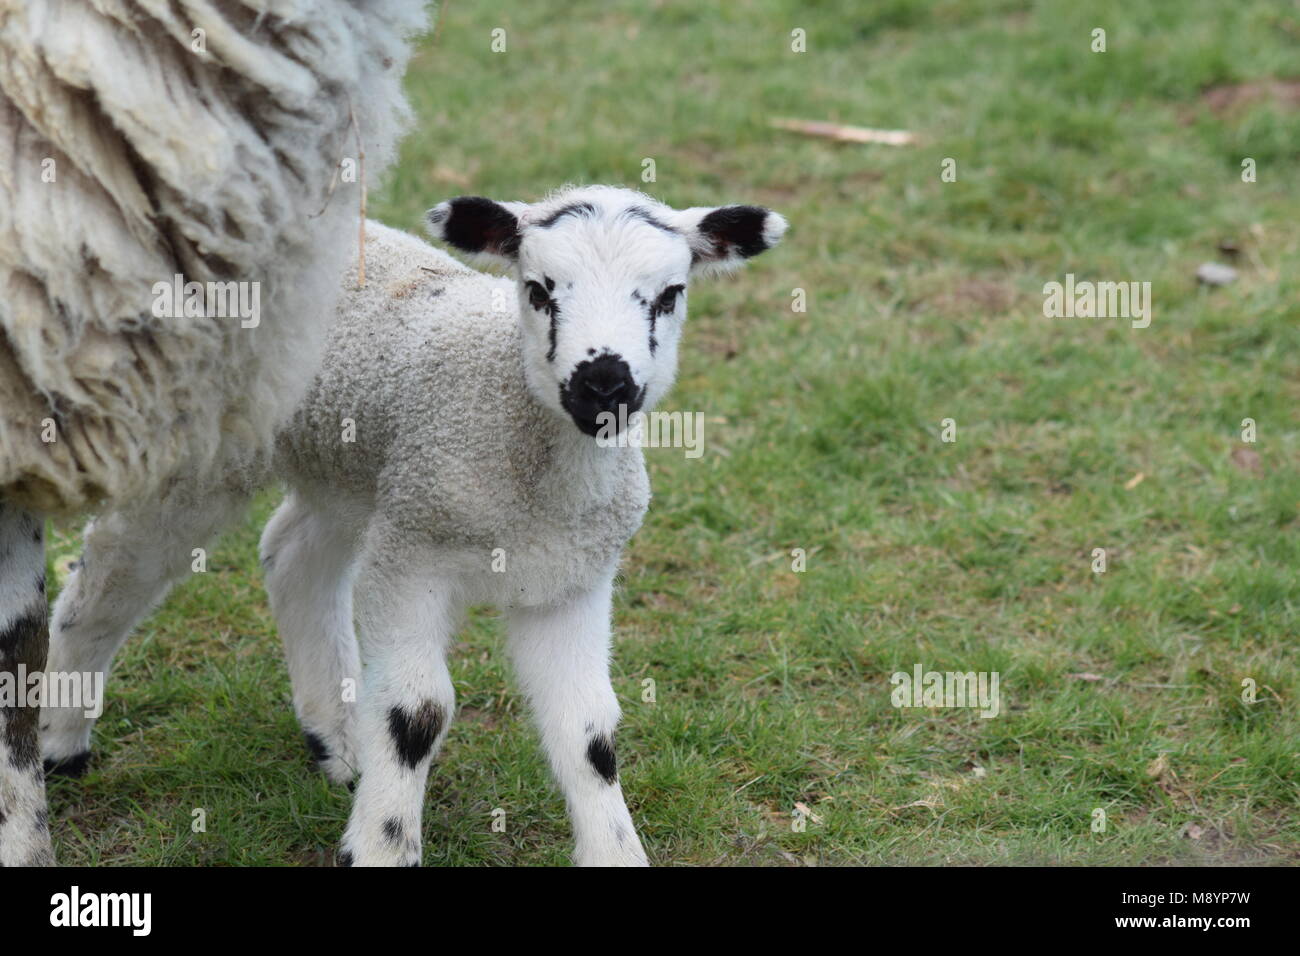 A sign that Spring has finally arrived: a new lamb with heart-shaped knee patches, in a field at Slindon, West Sussex. March 20th, 2018 Stock Photo